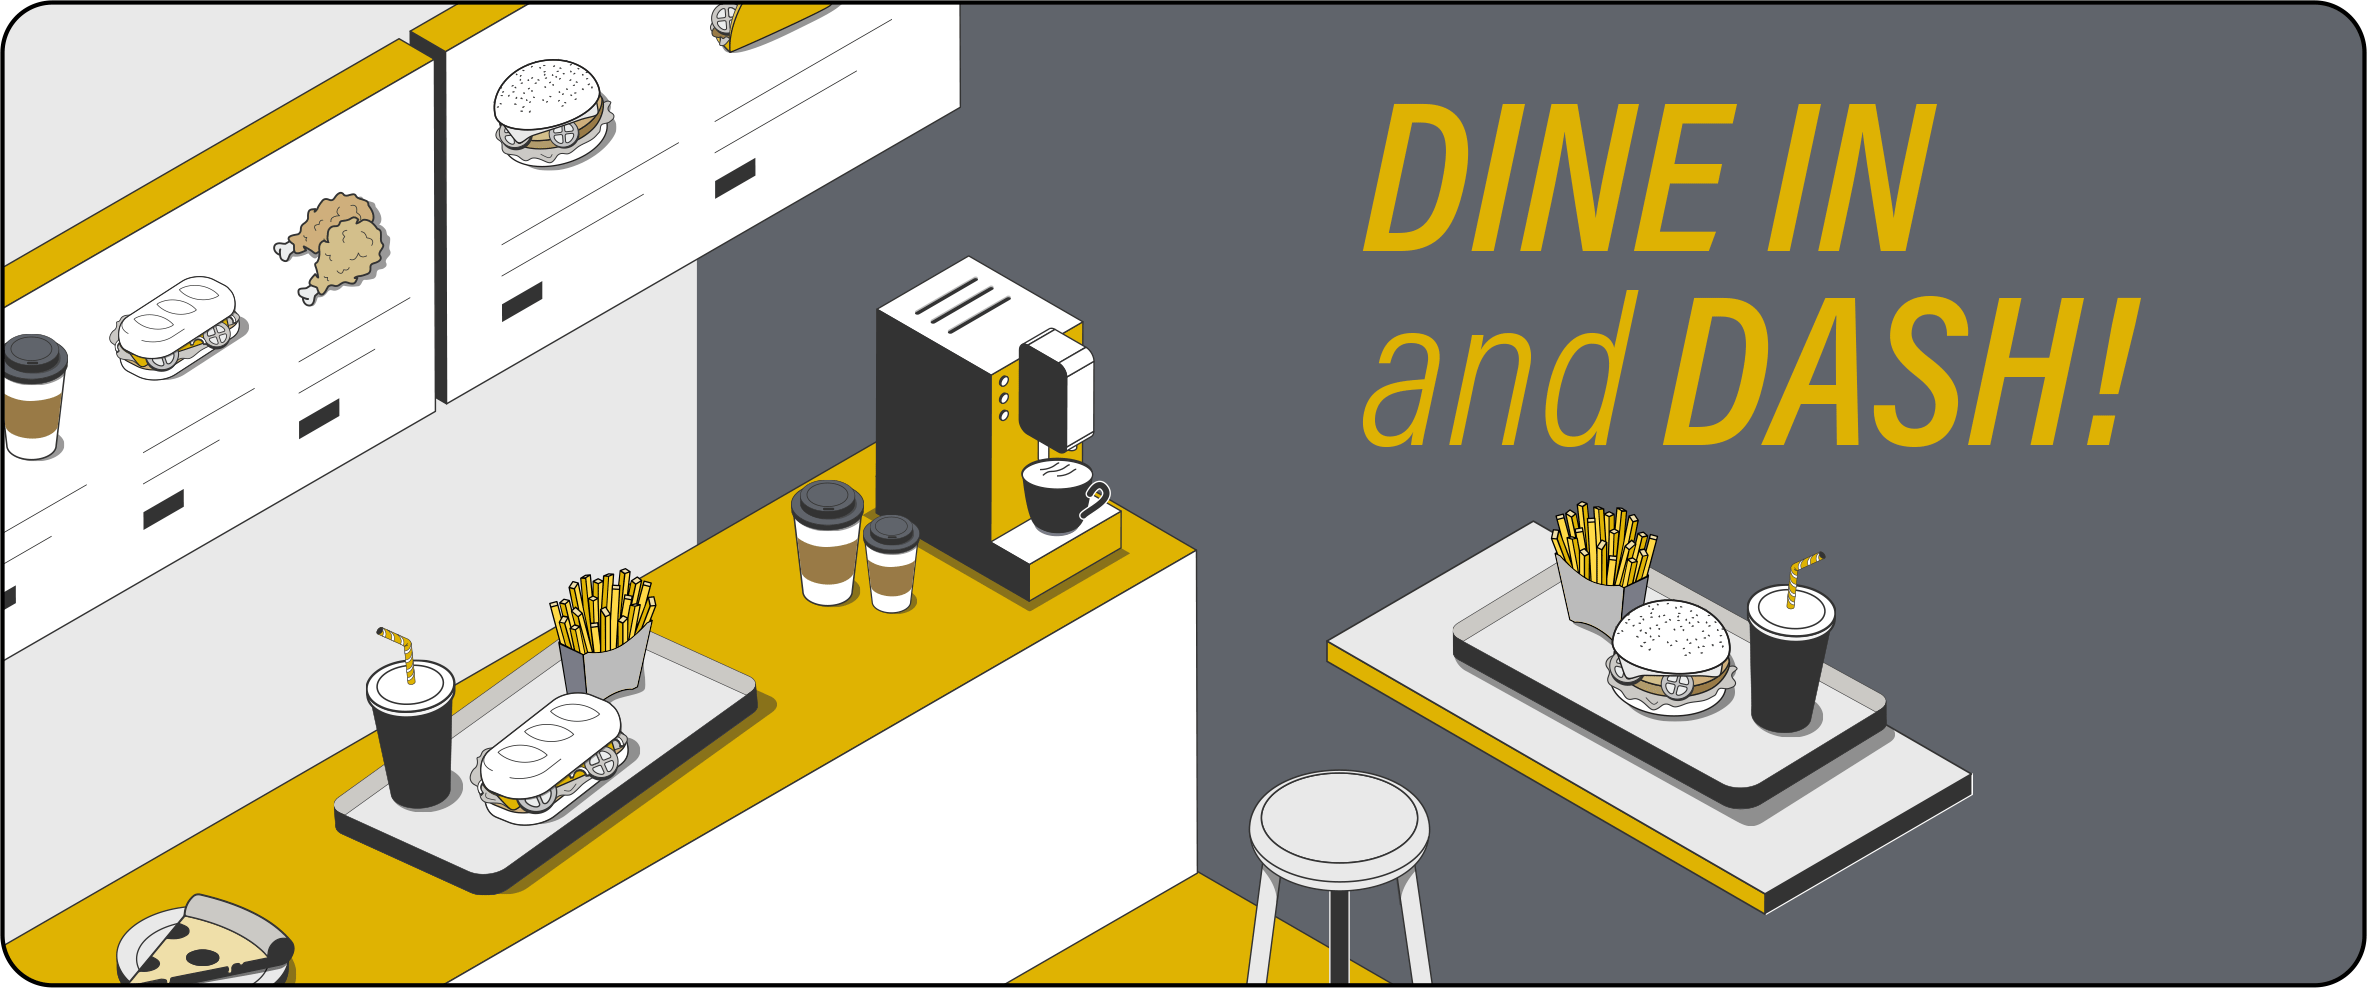 An illustration of a fast food counter and restaurant with the words "DINE IN and DASH!"